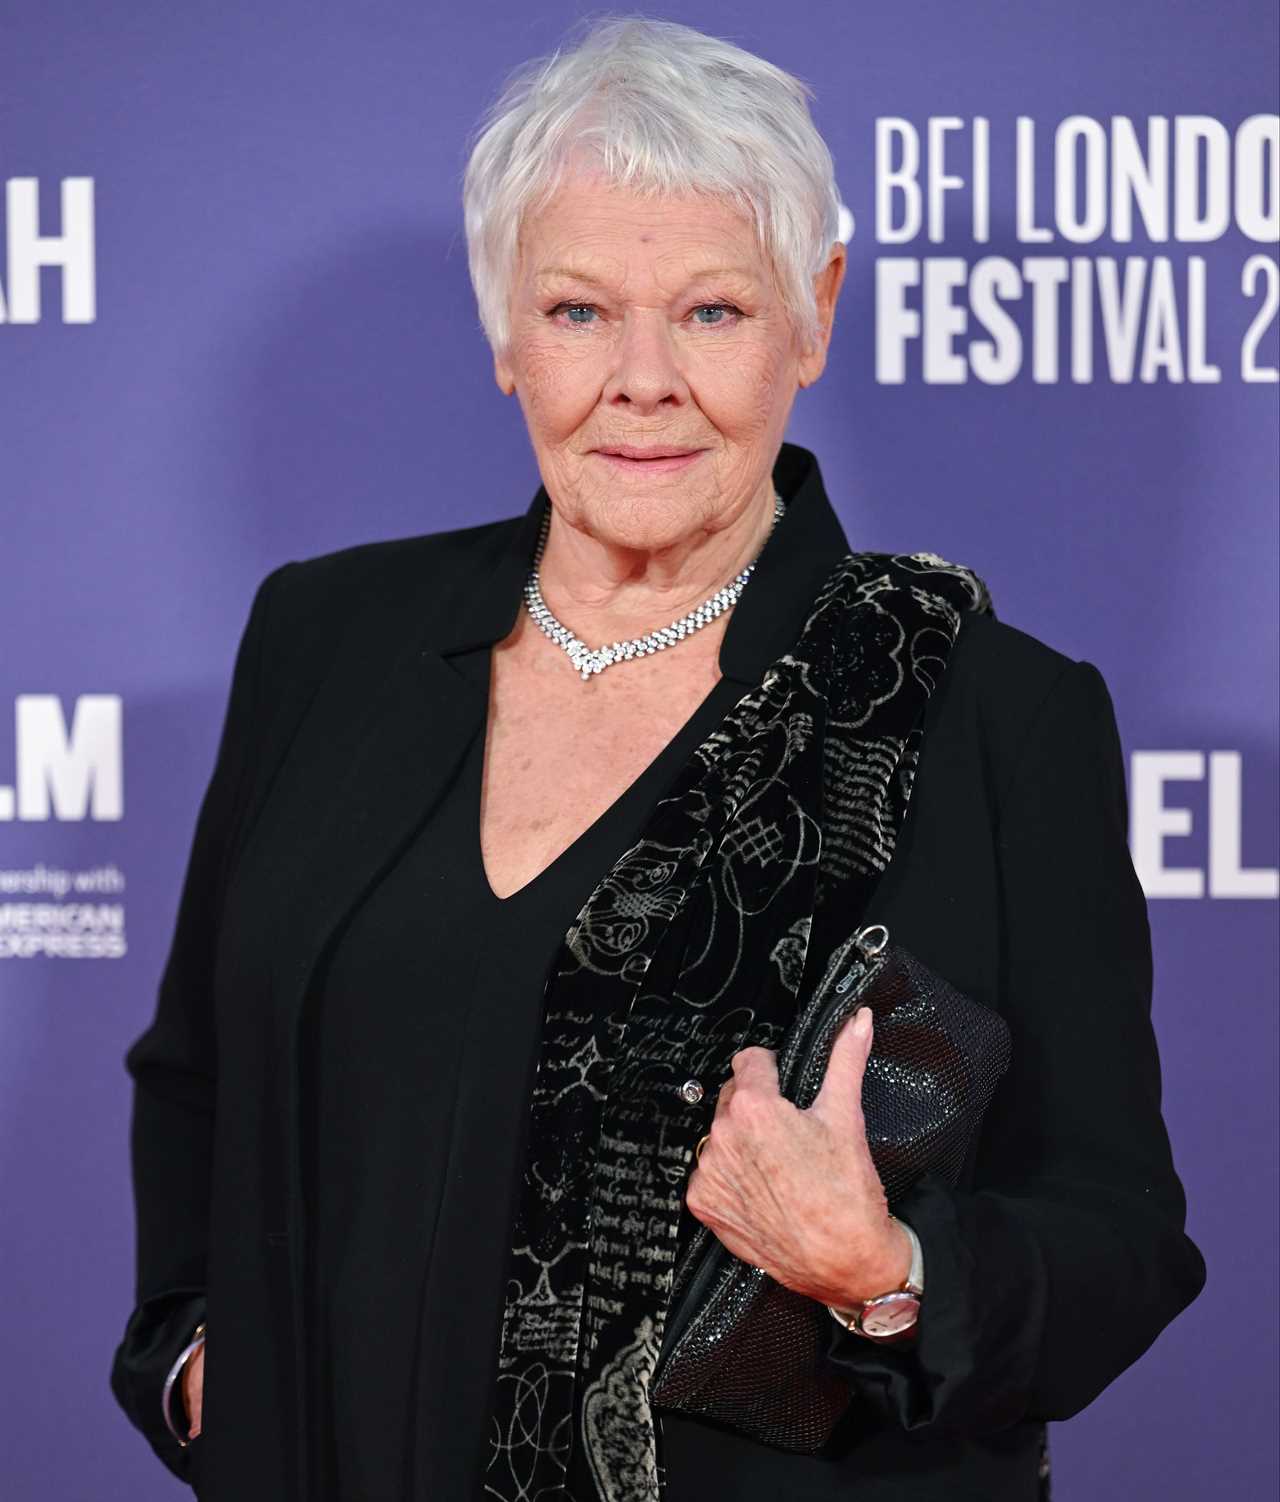 The Crown is crude & cruel – it must carry factual disclaimer as mark of respect to Queen Elizabeth II, says Judi Dench